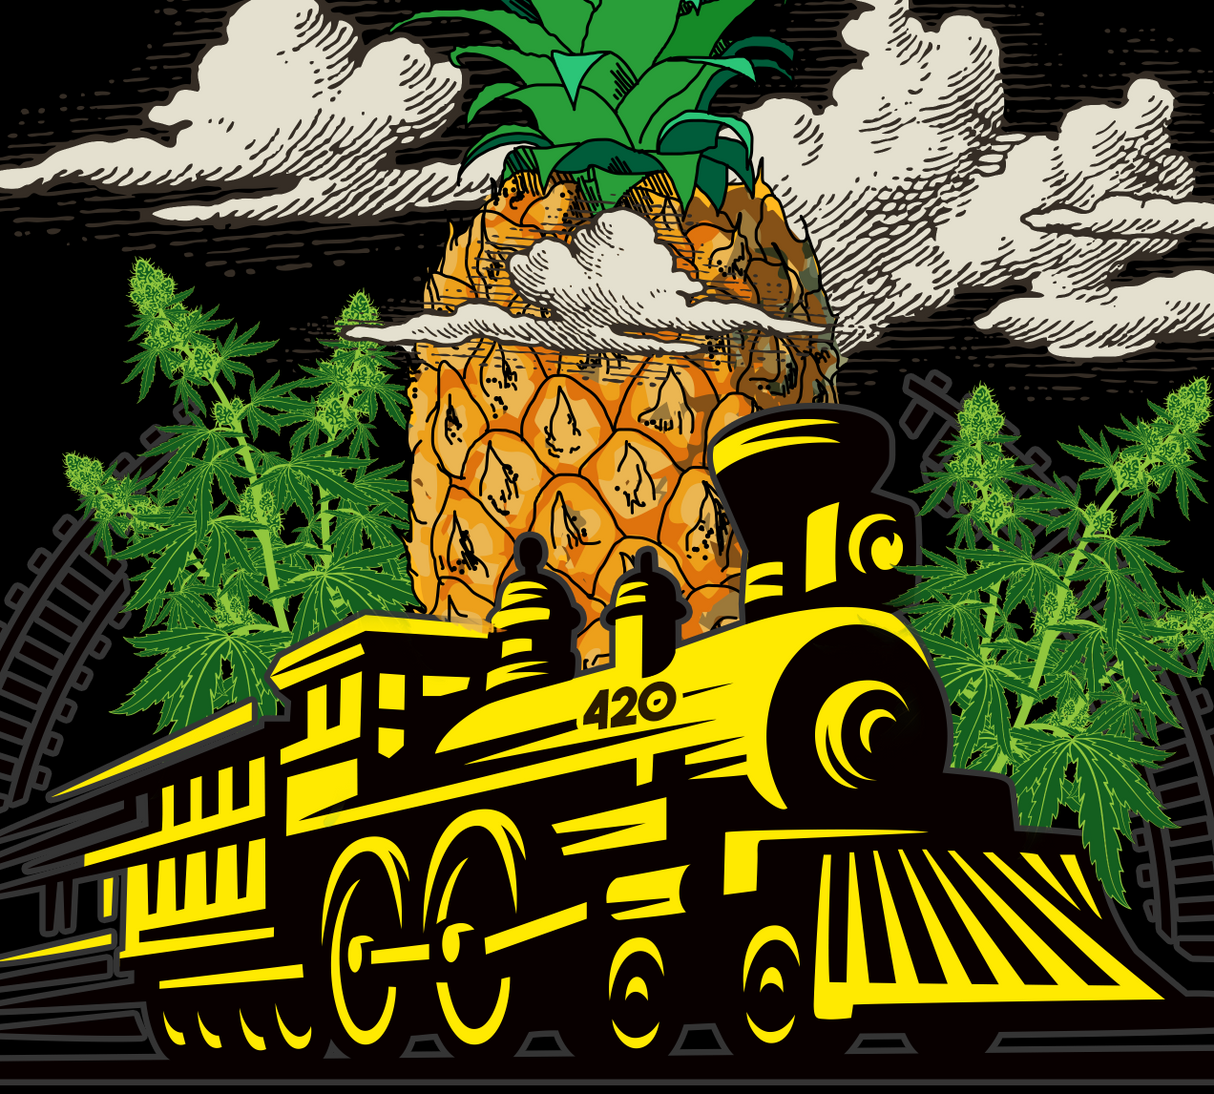 StonerDays Pineapple Express Racerback tank with cannabis and train graphic